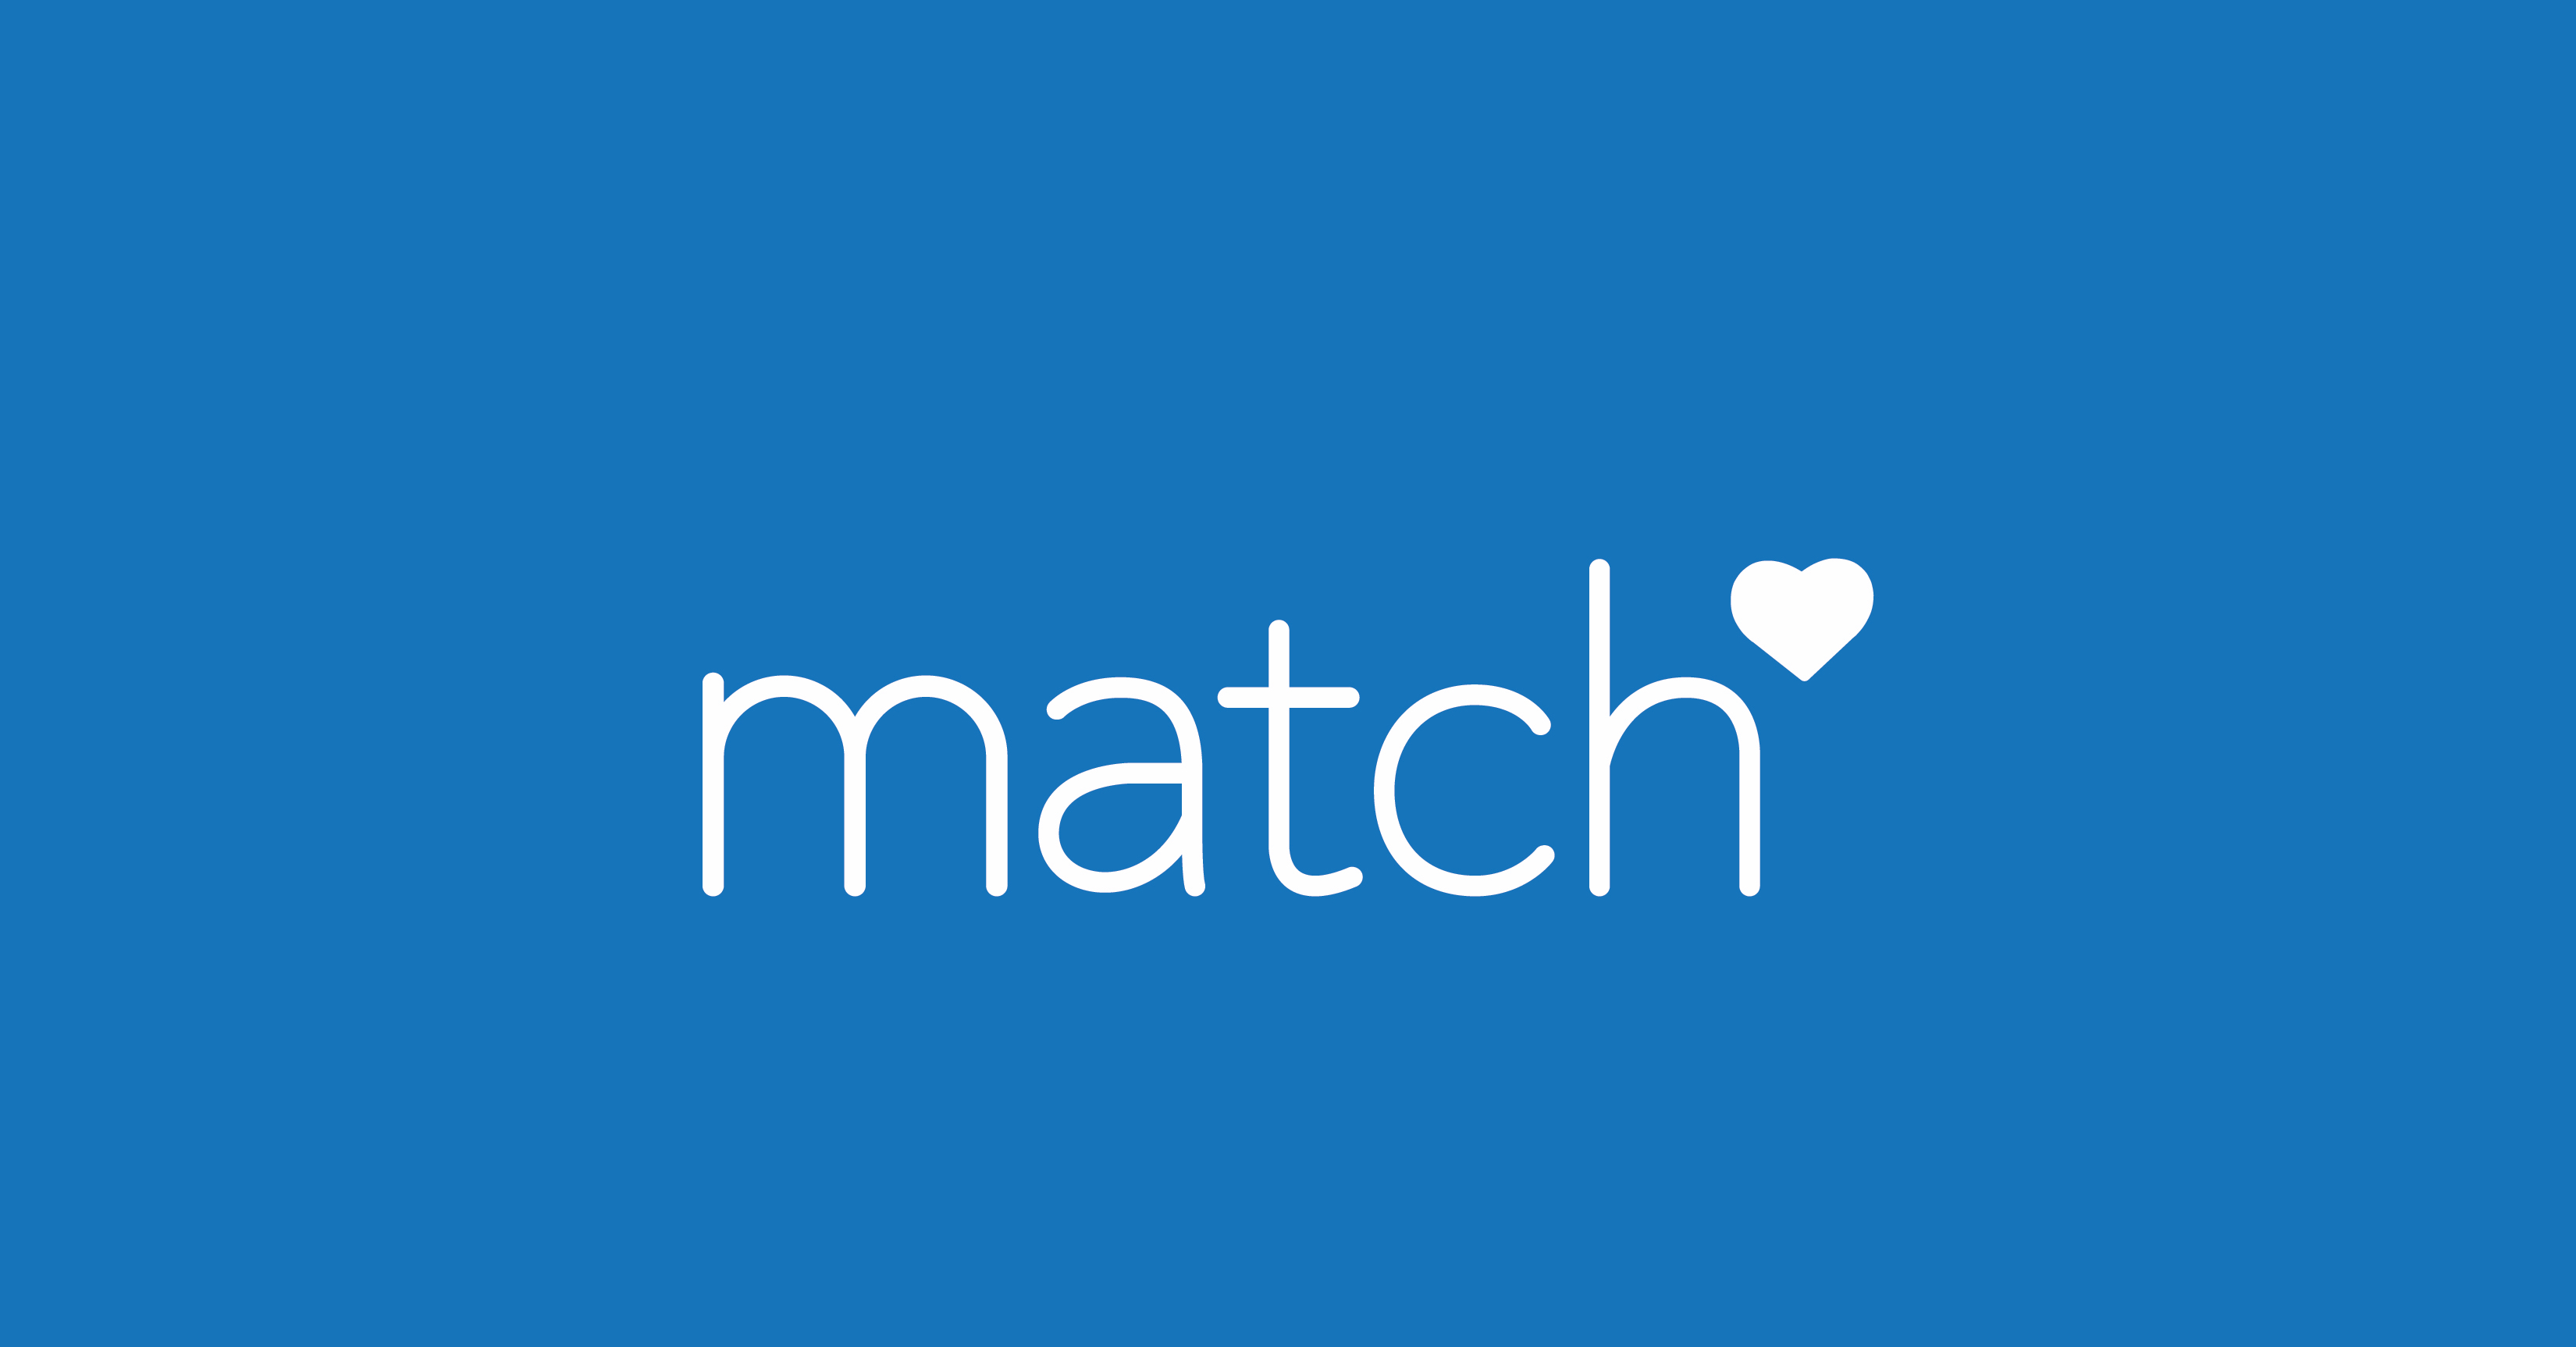 Dating app maker Match sued by FTC for fraud | TechCrunch